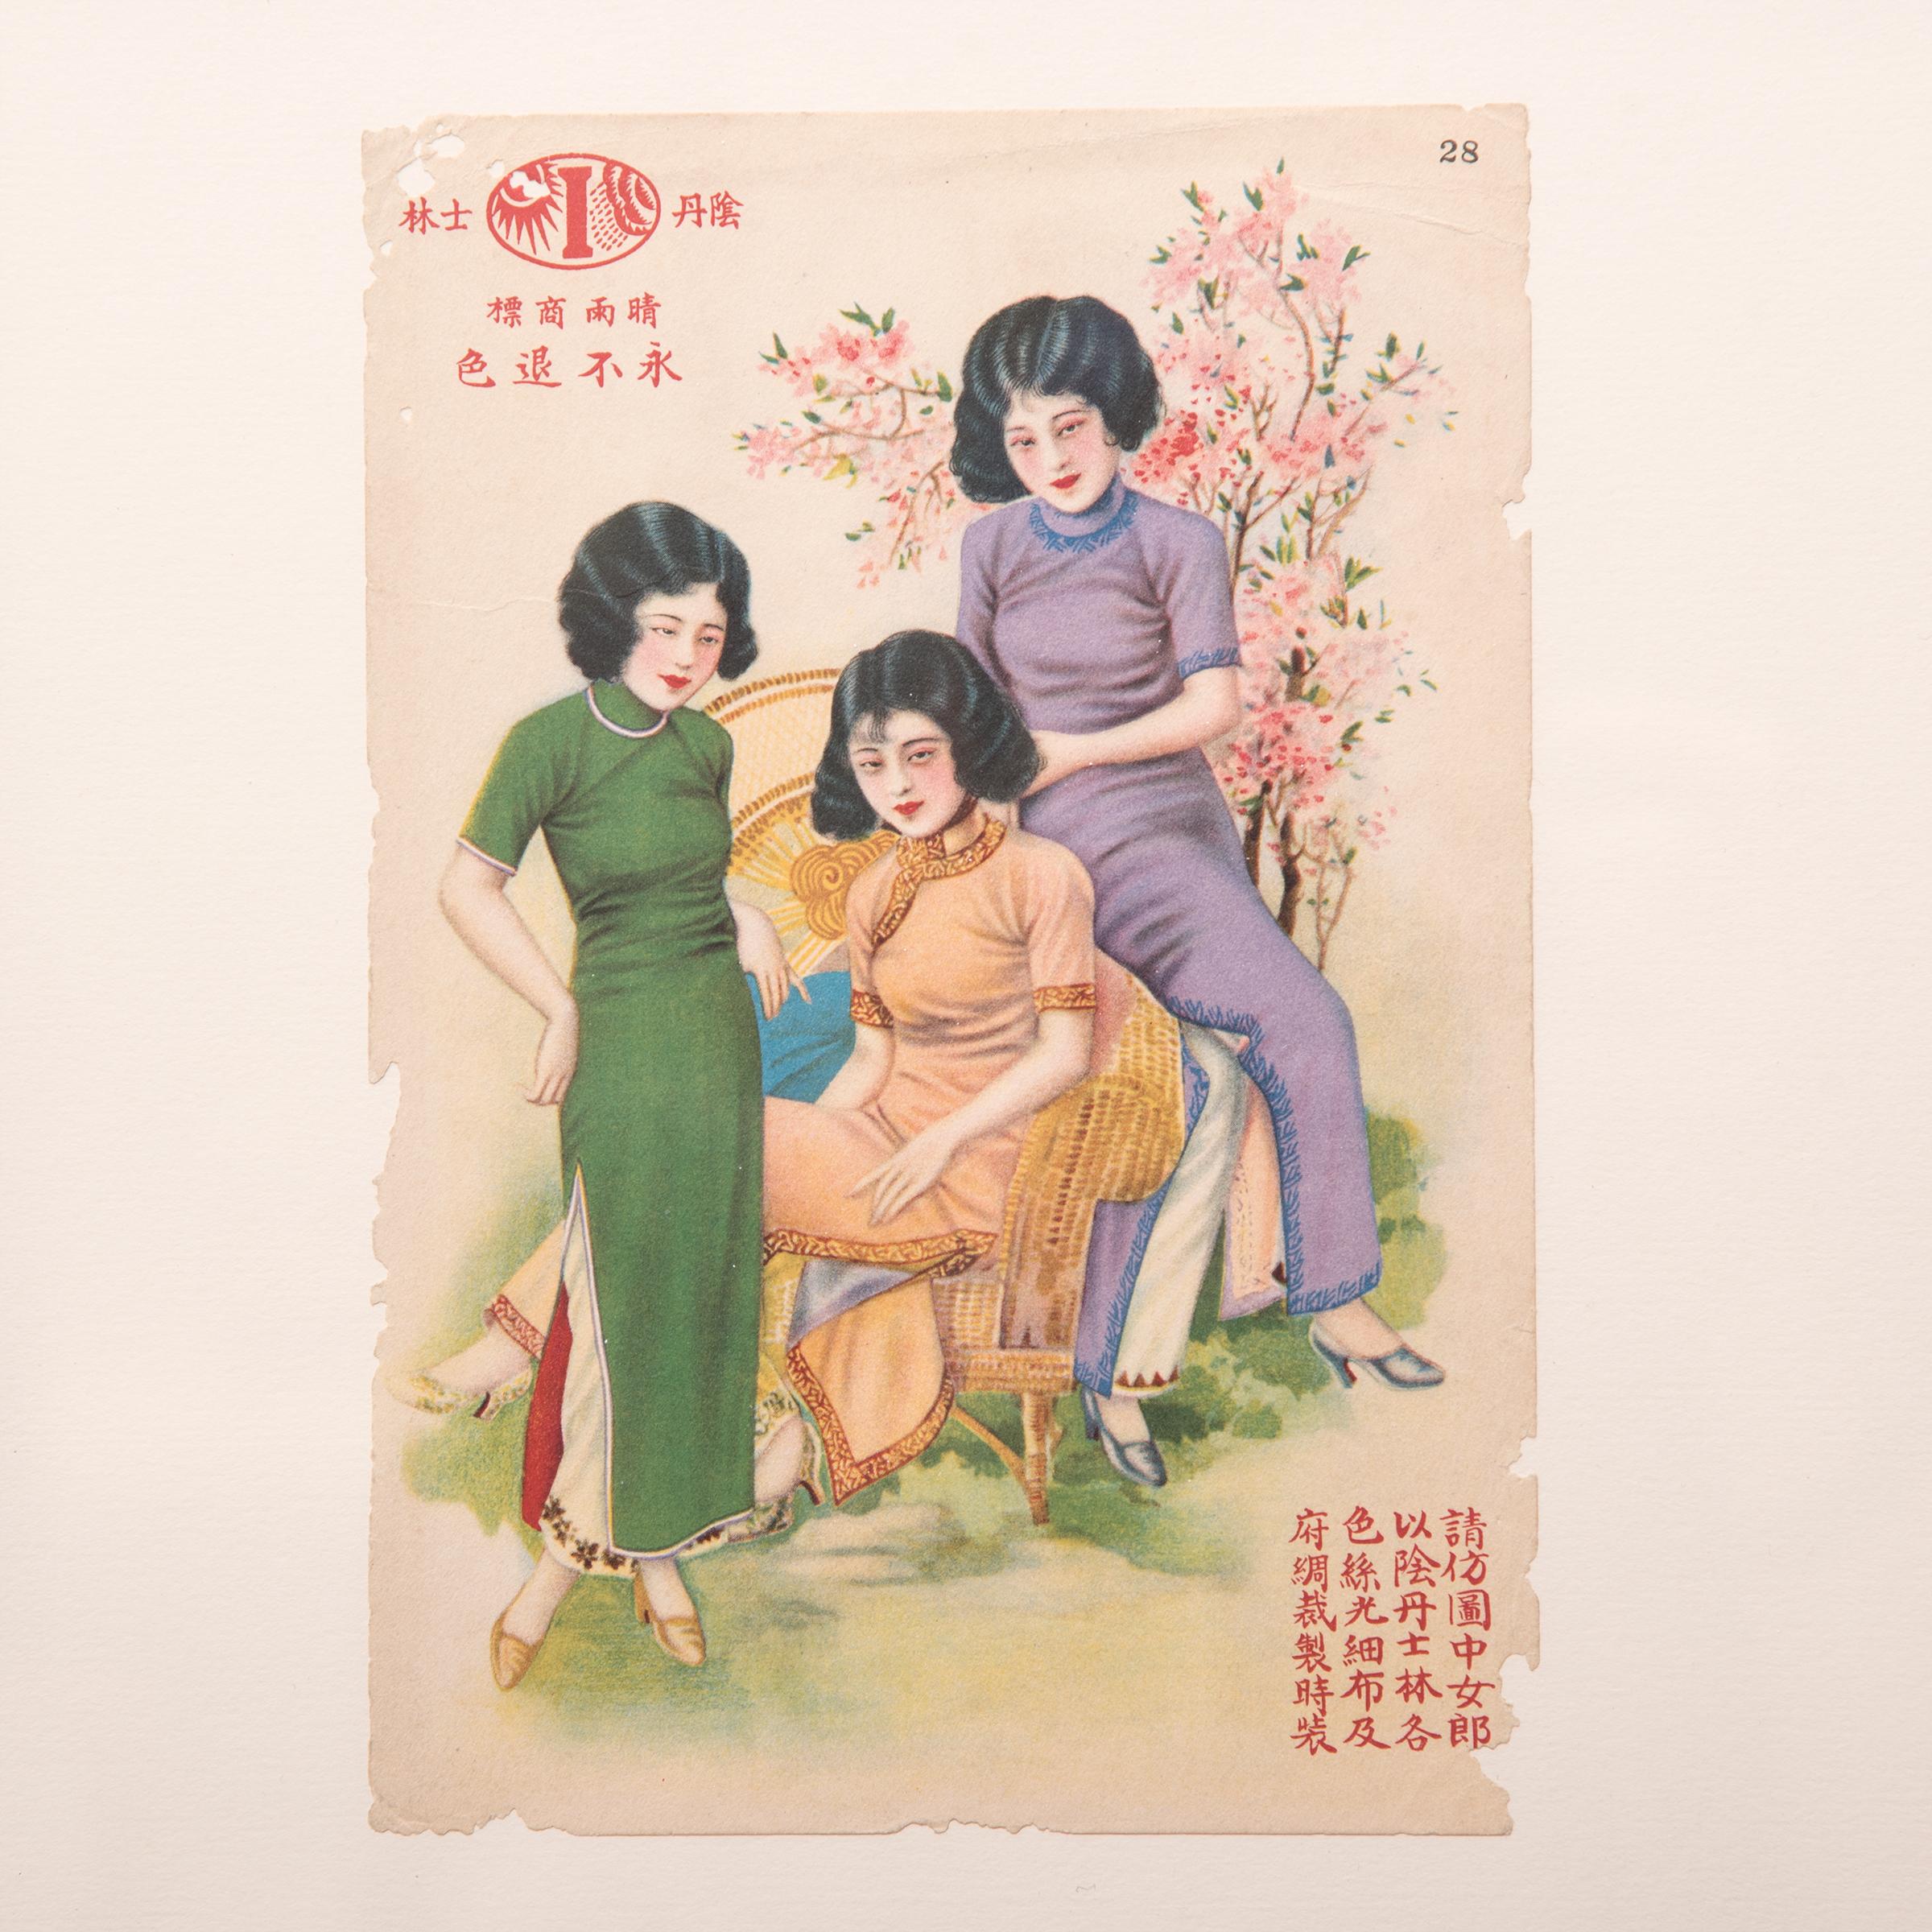 In tandem with the growing number of newspapers and periodicals, advertisements proliferated during China’s Republic era. Mixing Western and traditional visual styles, this early 20th century poster depicts three well-known starlets of the day